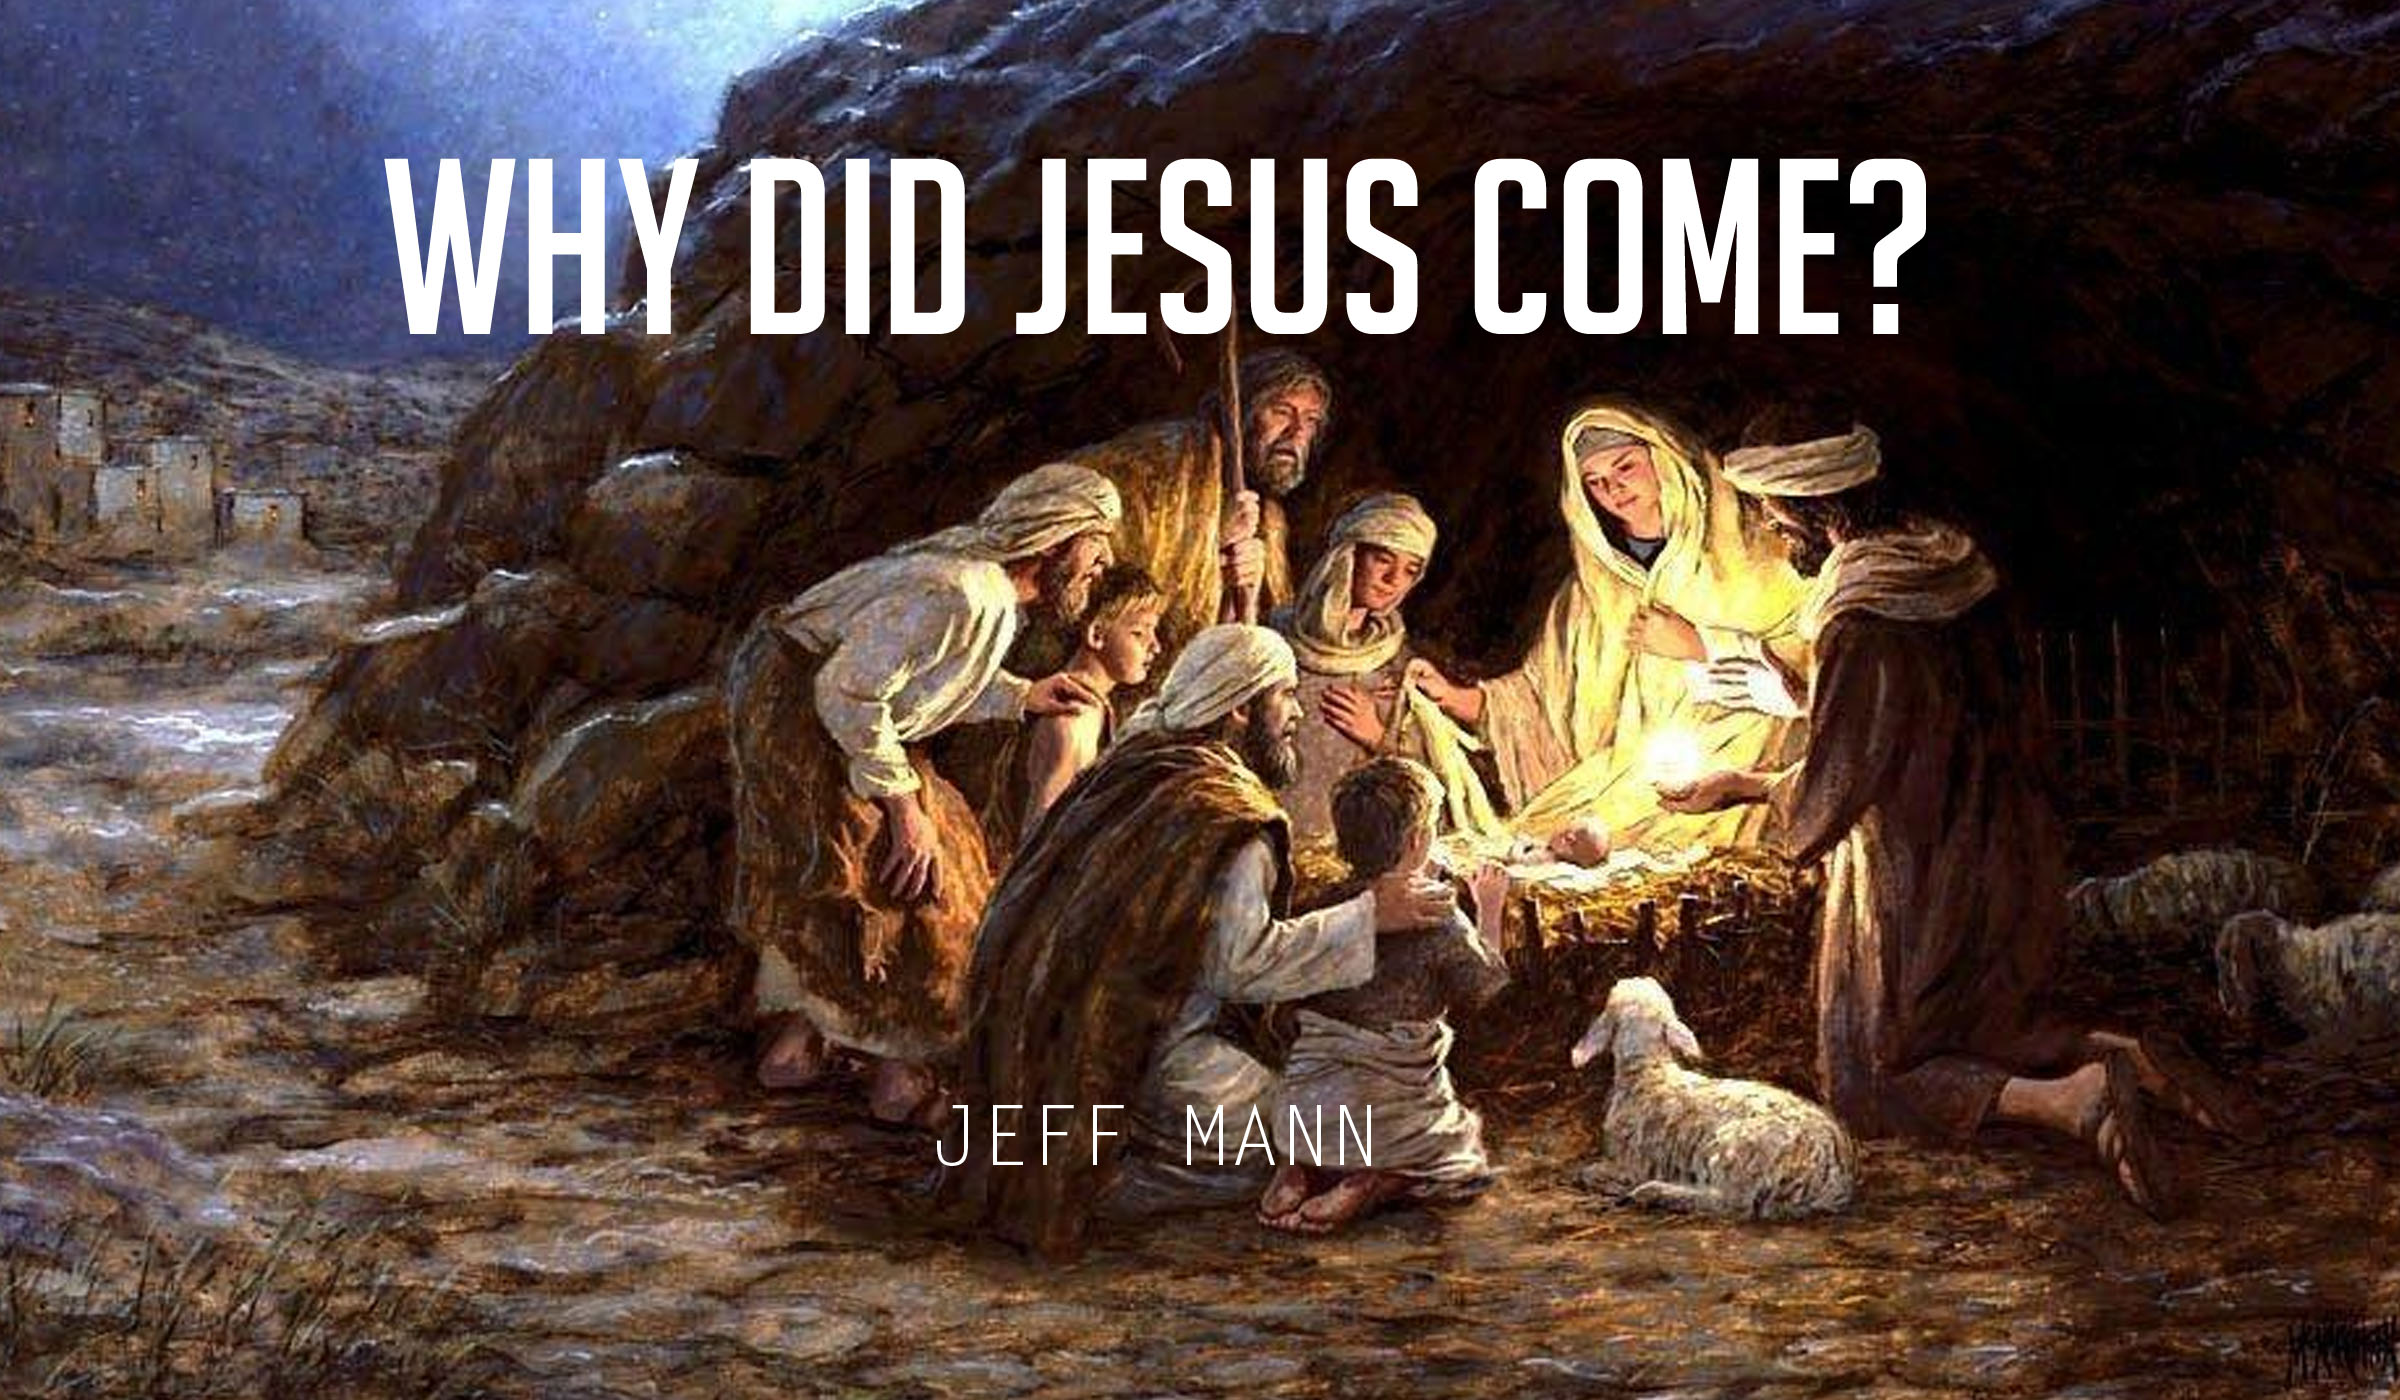 Why Did Jesus Come?